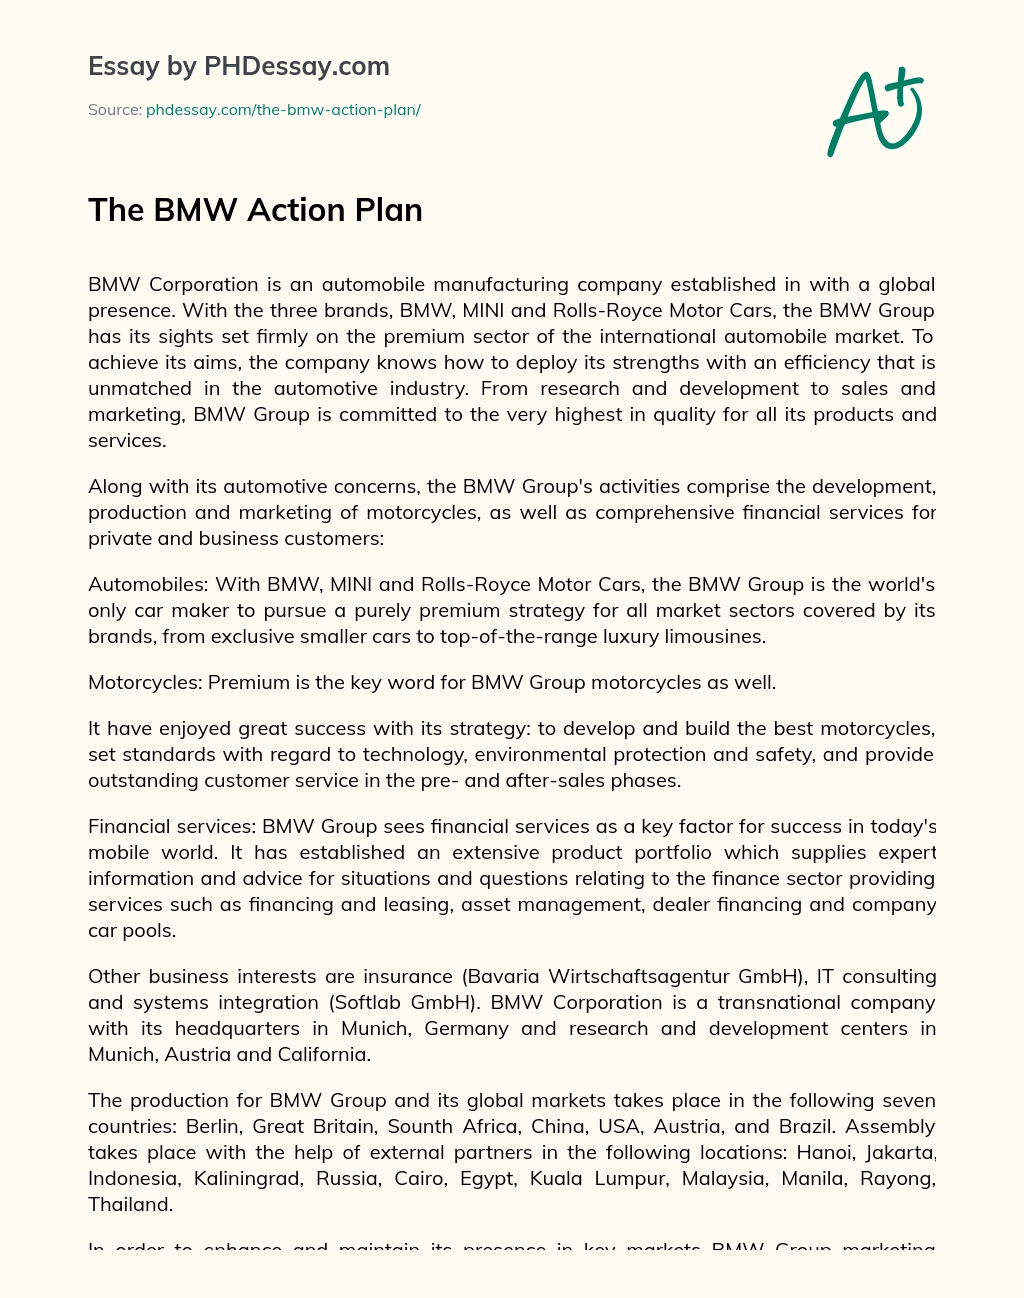 The BMW Action Plan essay